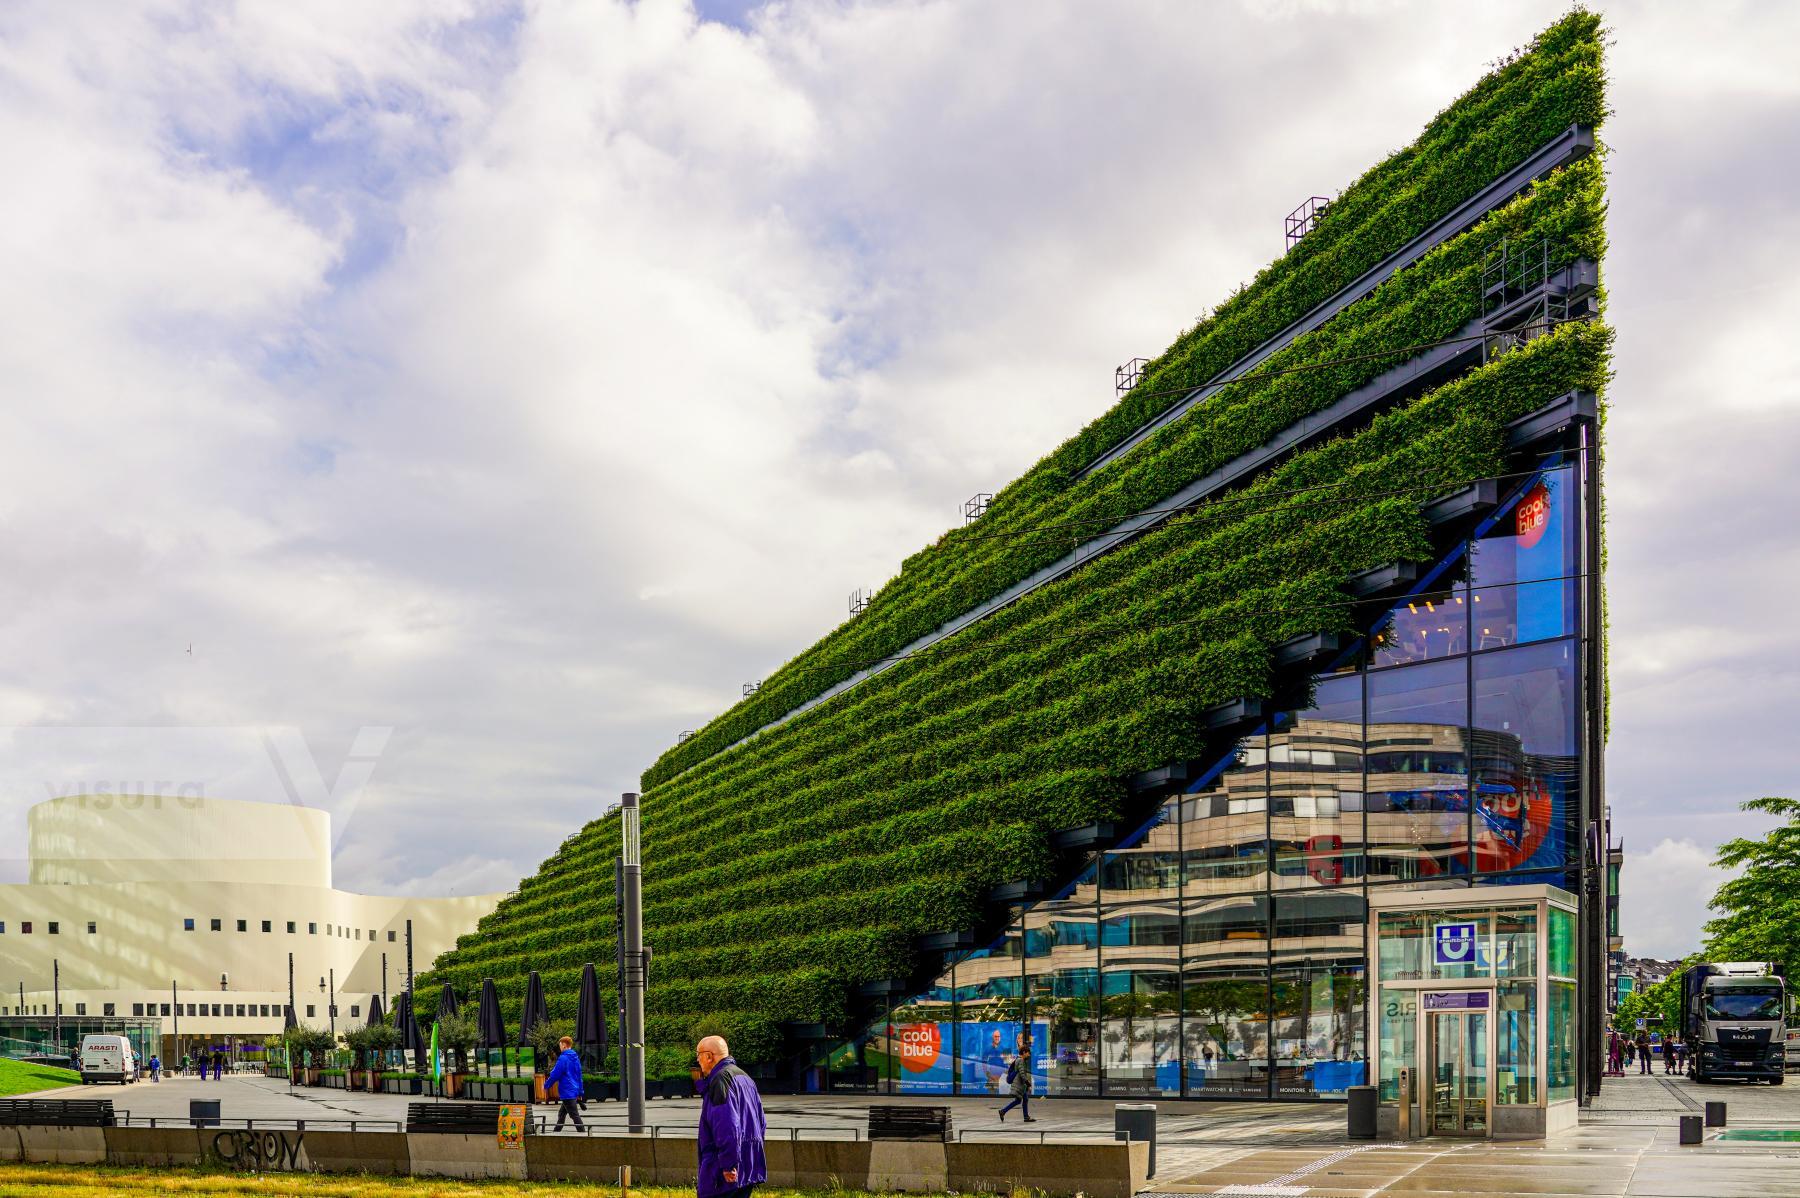 Purchase Europe's largest Building with a green Facade to improve the City's Climate by Michael Nguyen